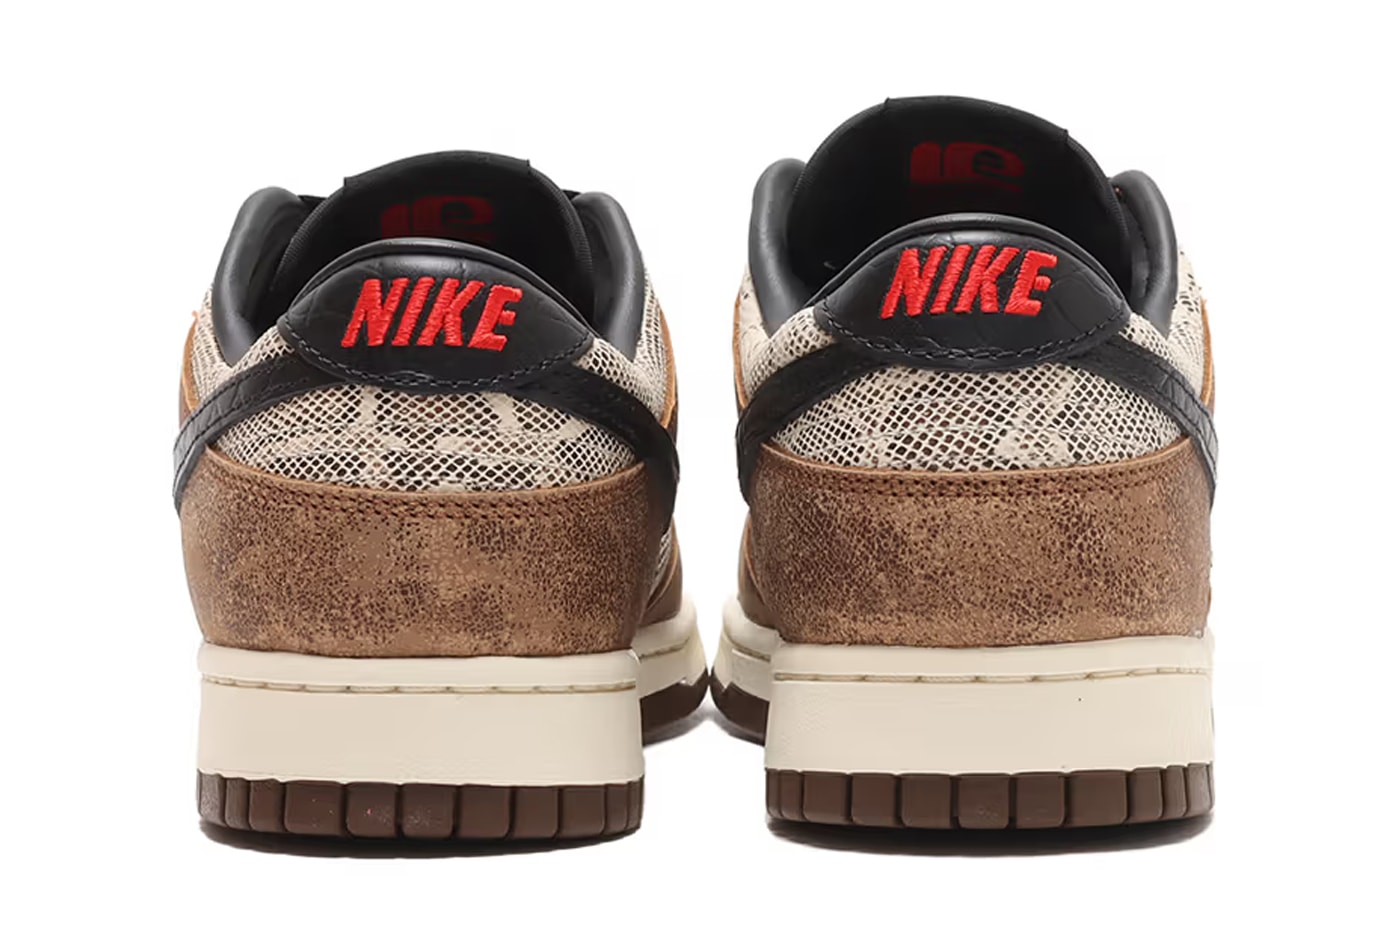 Atmos nike co jp tournament head 2 head pack 8 SNKRS Air max 1 prm dunk low prm snakeskin pattern release info date price